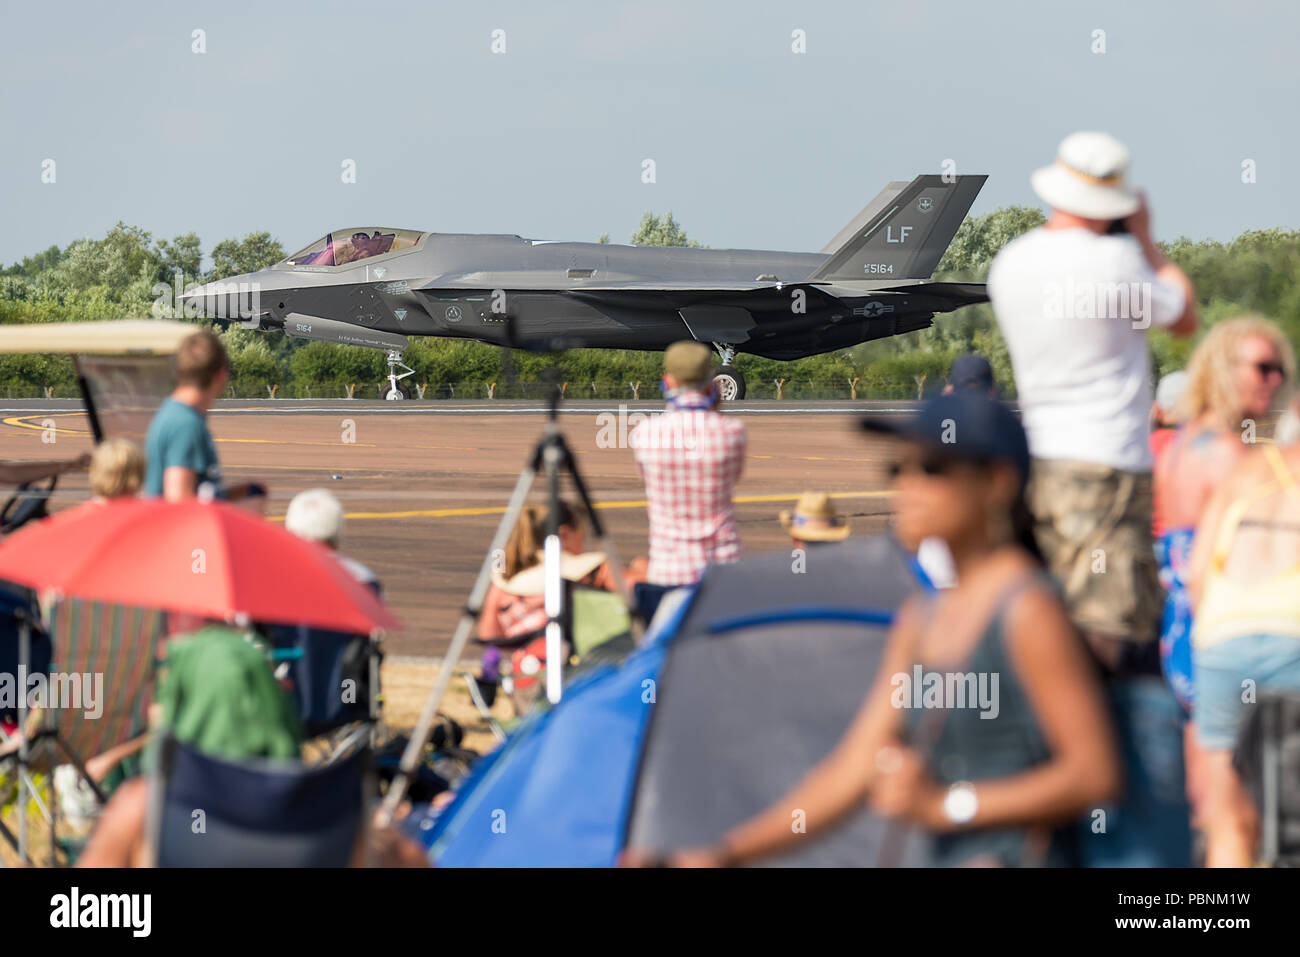 A Lockheed Martin F-35 Lightning II taxiing on the runway at RIAT Fairford 2018, UK, with spectators looking on. Stock Photo